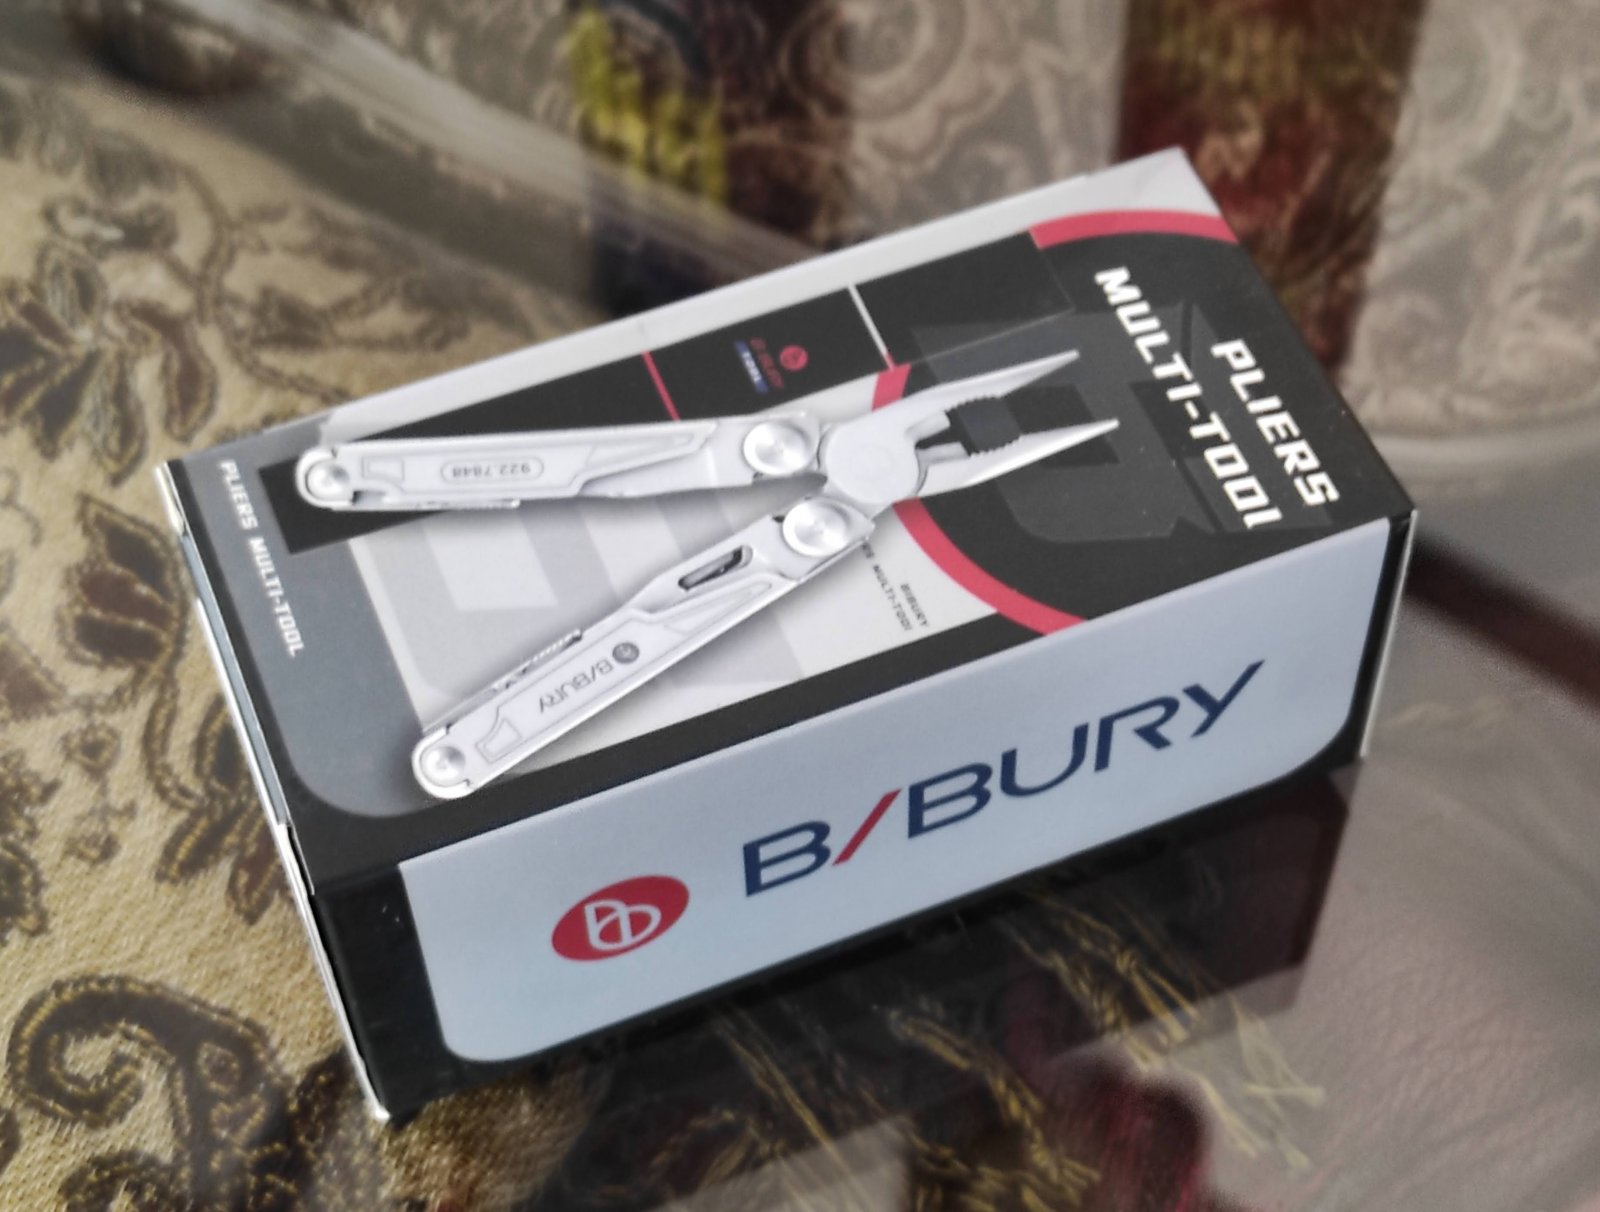 Leatherman Wave Plus: best price for the world's favourite multi